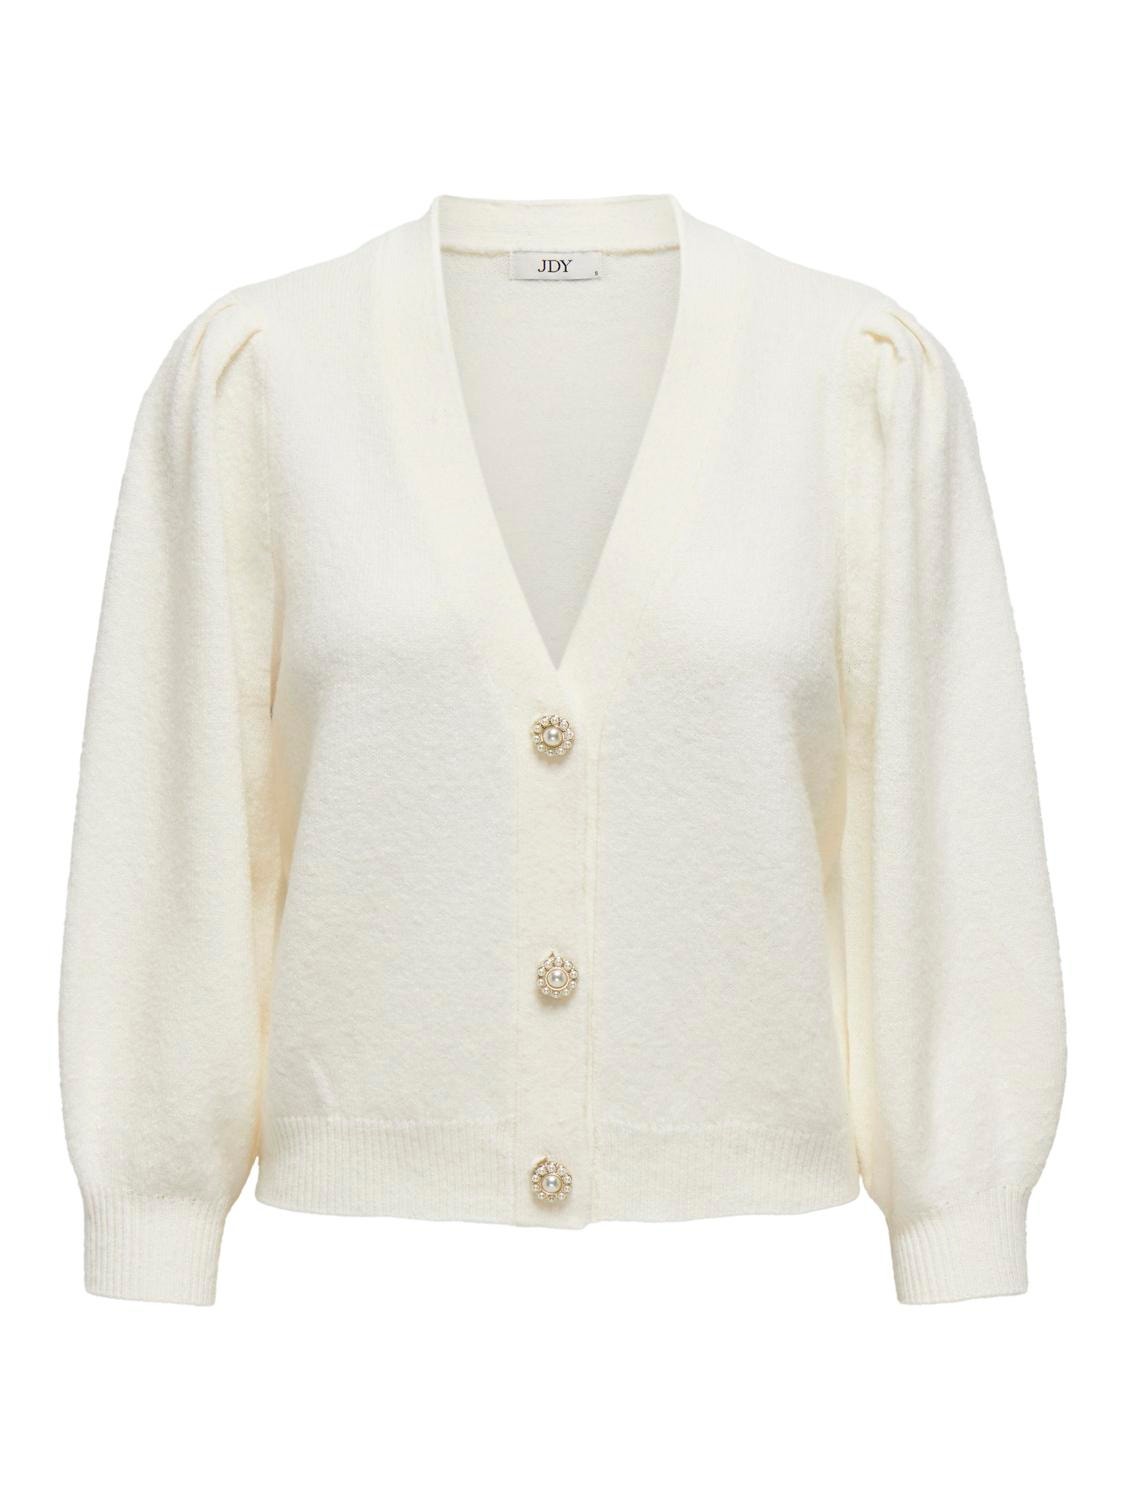 ONLY V-Neck Puff sleeves Knit Cardigan -Cloud Dancer - 15312054